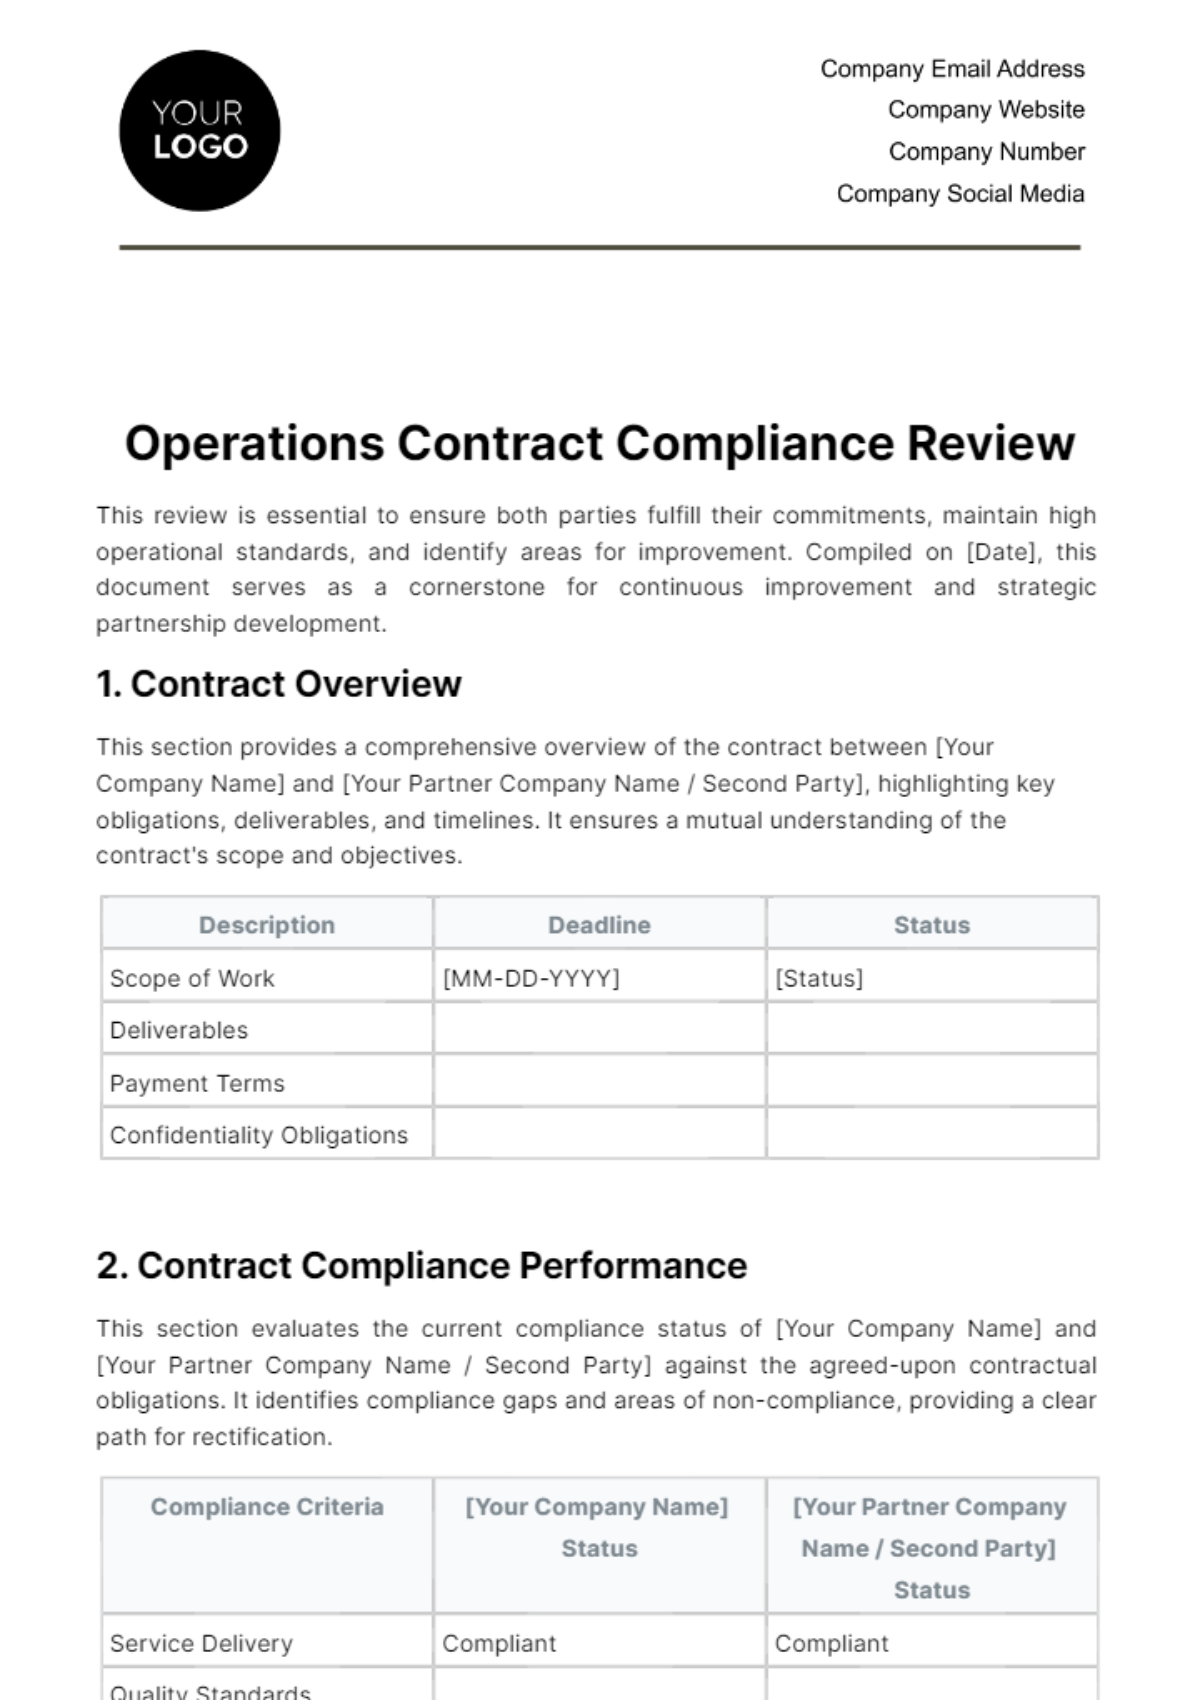 Free Operations Contract Compliance Review Template